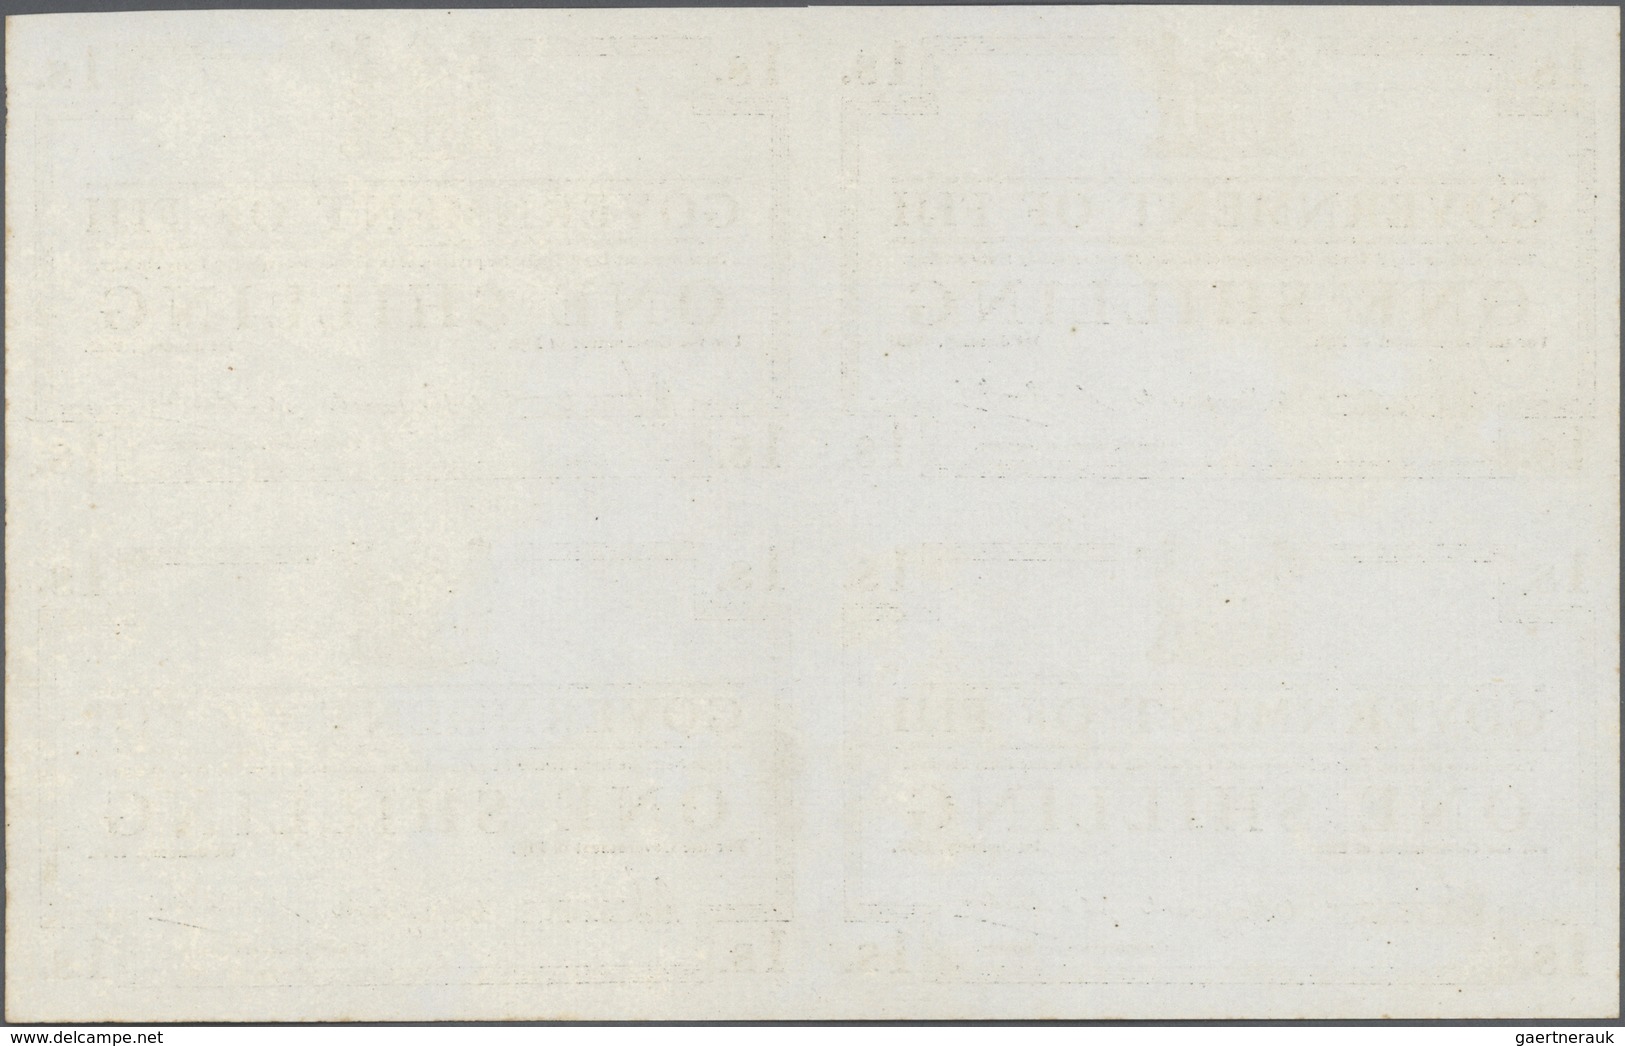 01445 Fiji: Uncut Sheet Of 4 Notes 1 Shilling 1942, P.49a With A Few Brownish Spots Along The Borders, Oth - Fiji